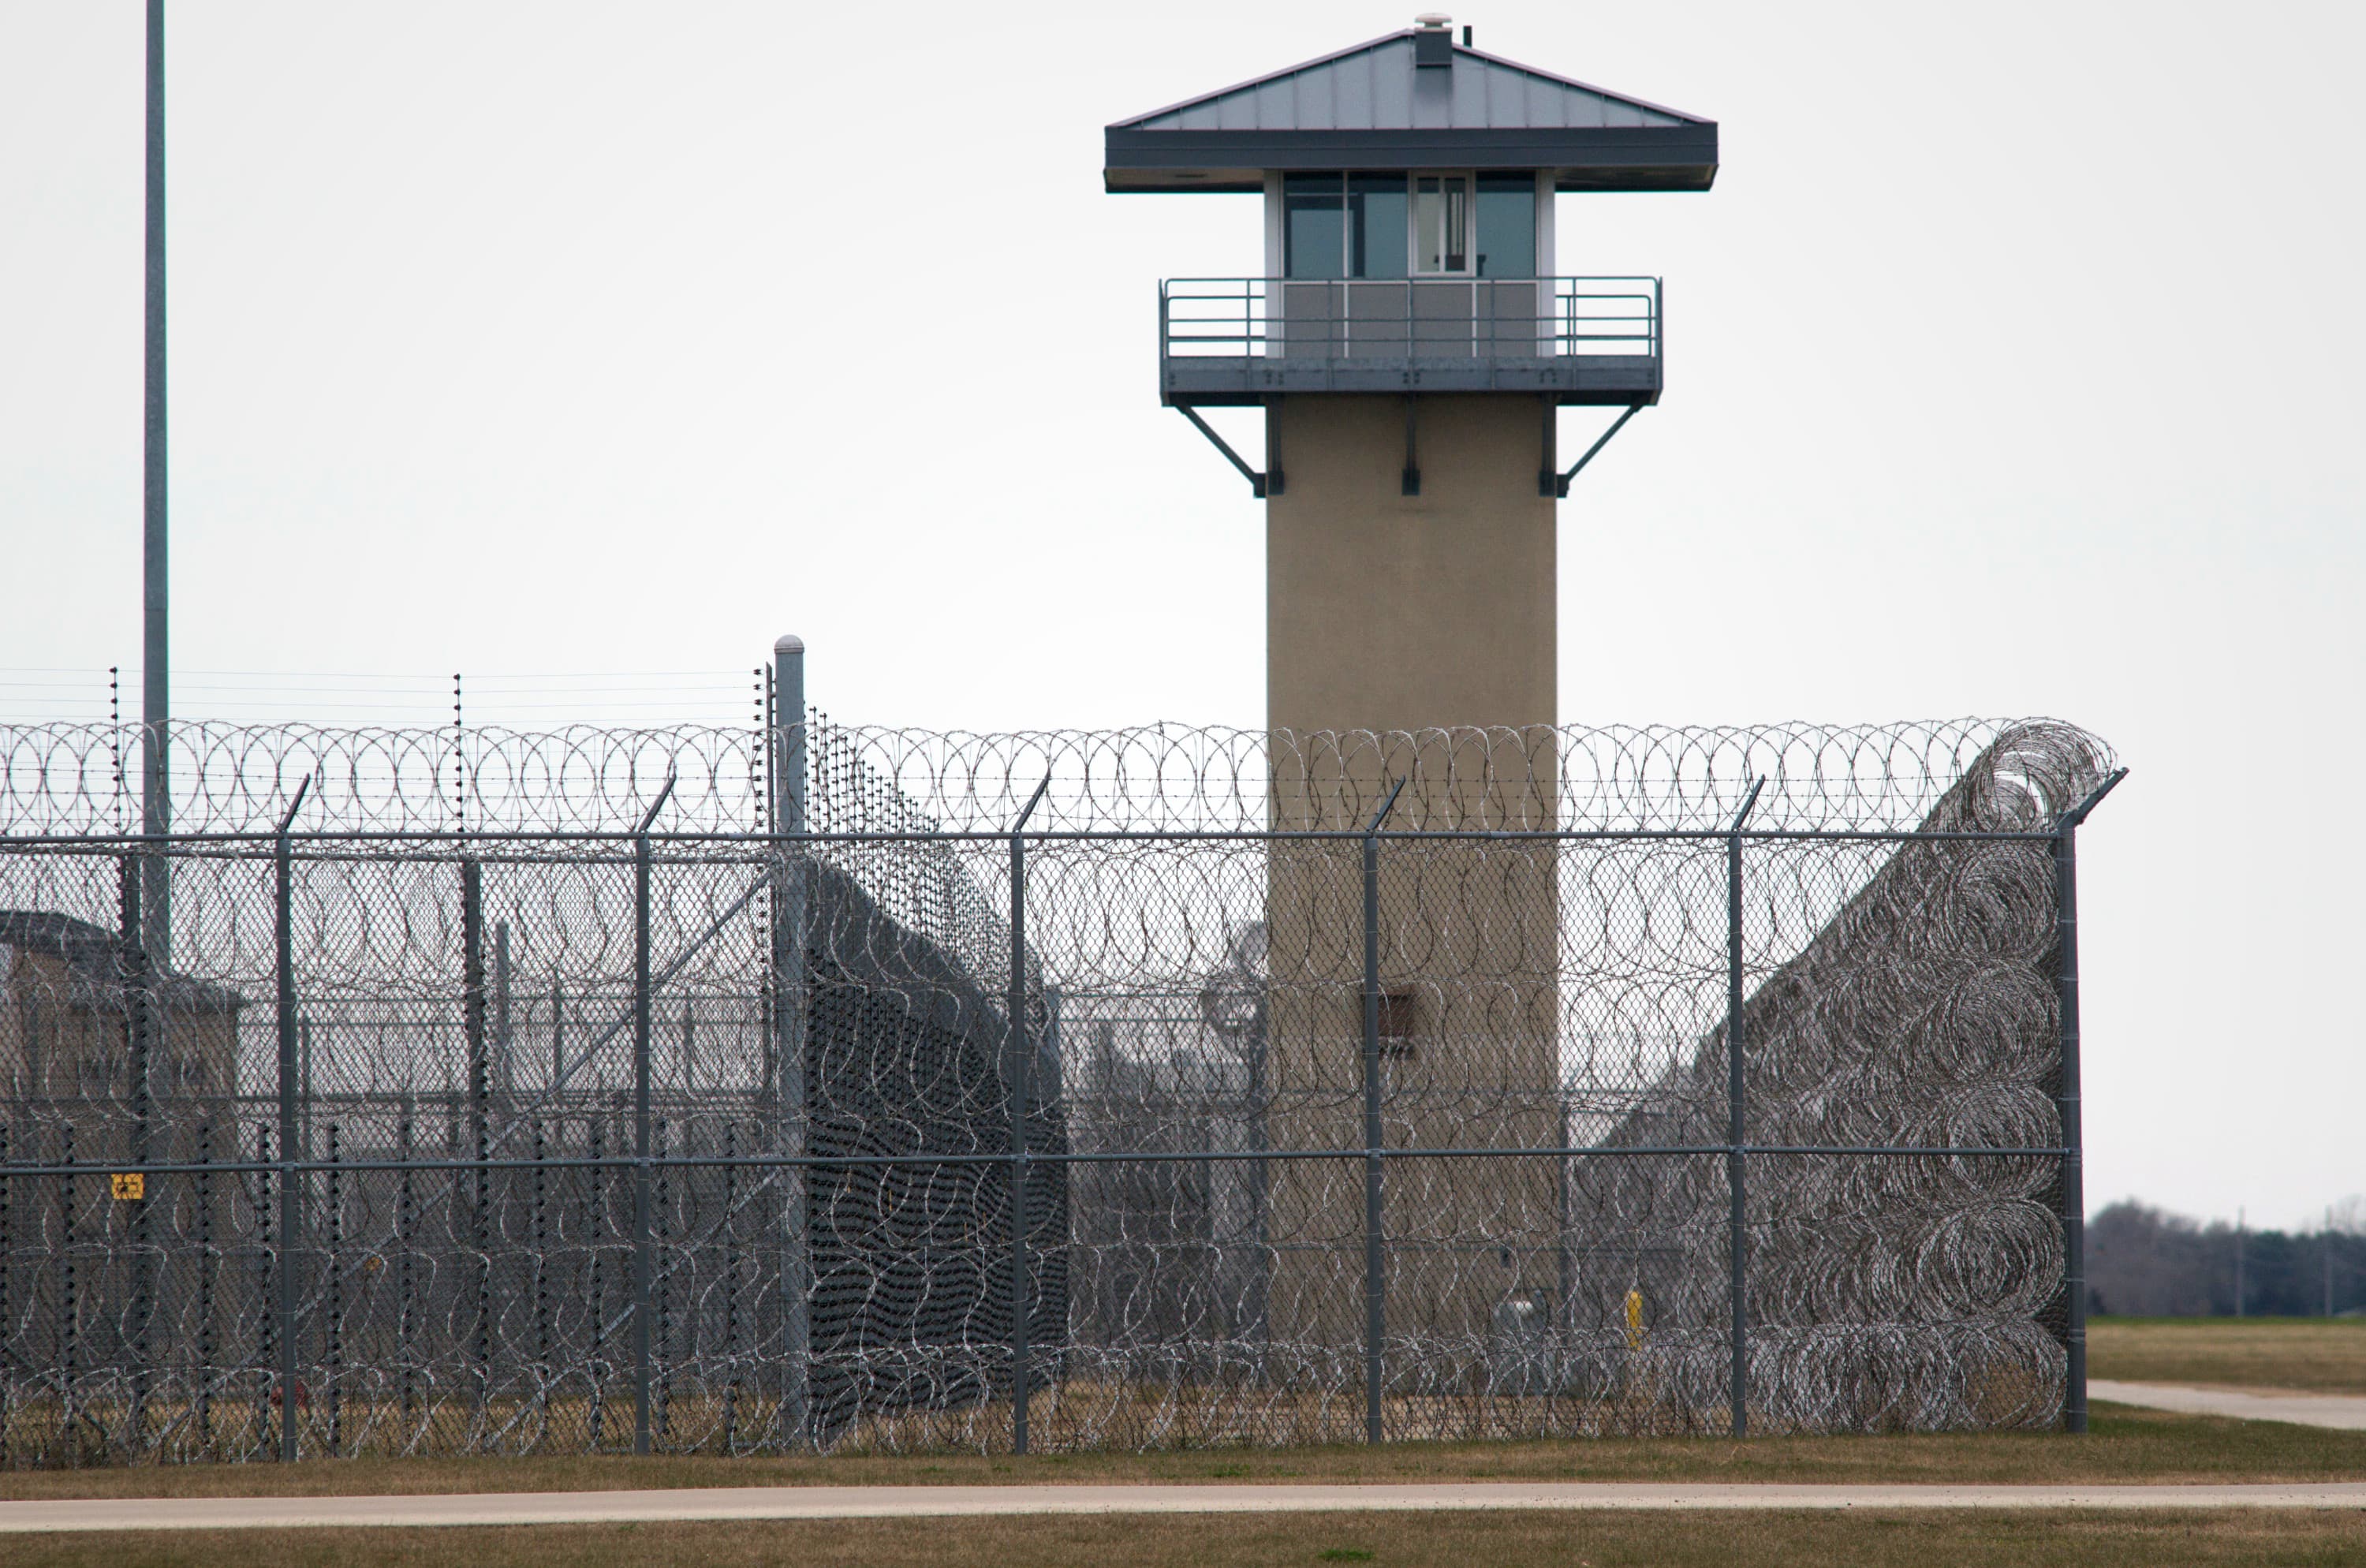 How Two Prisoners Escaped From A Maximum Security Prison - The New